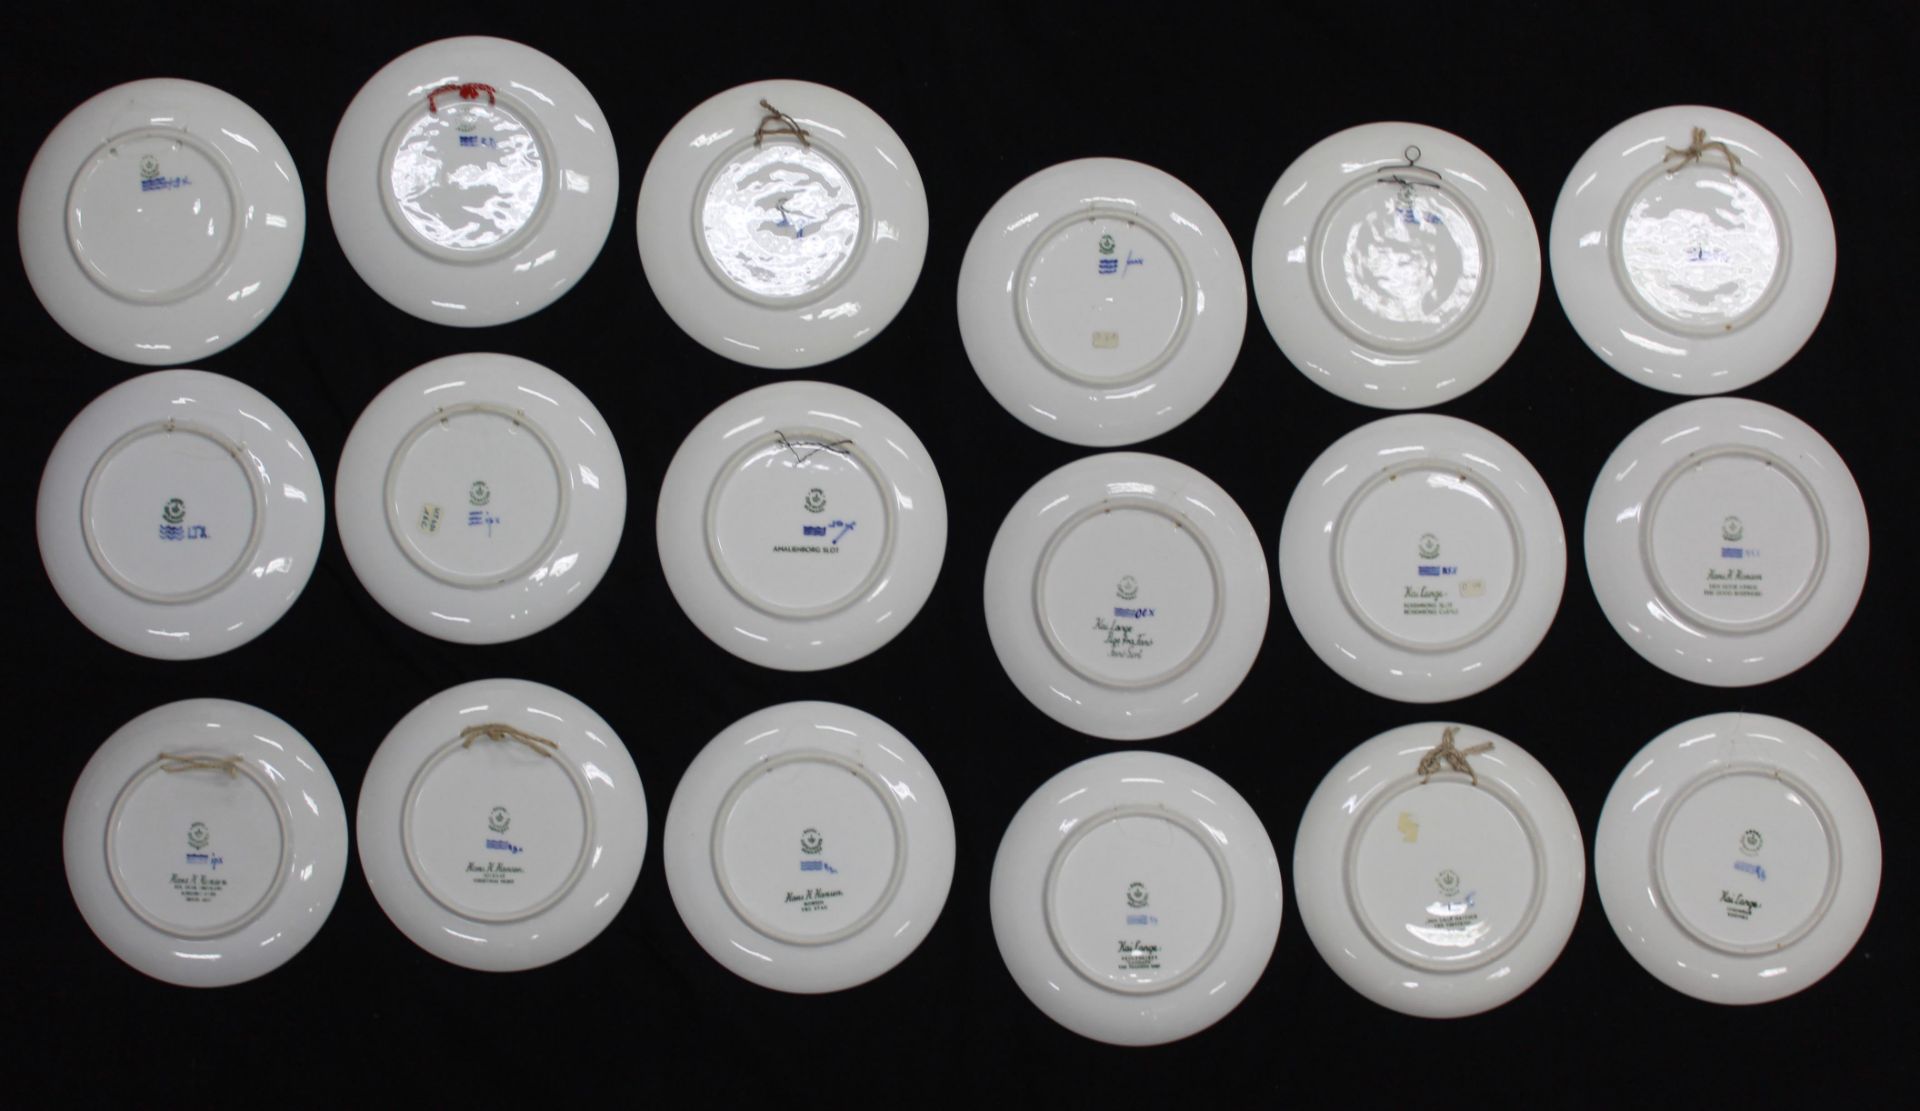 94 Christmas plates - Royal Copenhagen. Complete series from 1910-2004. - Image 28 of 28